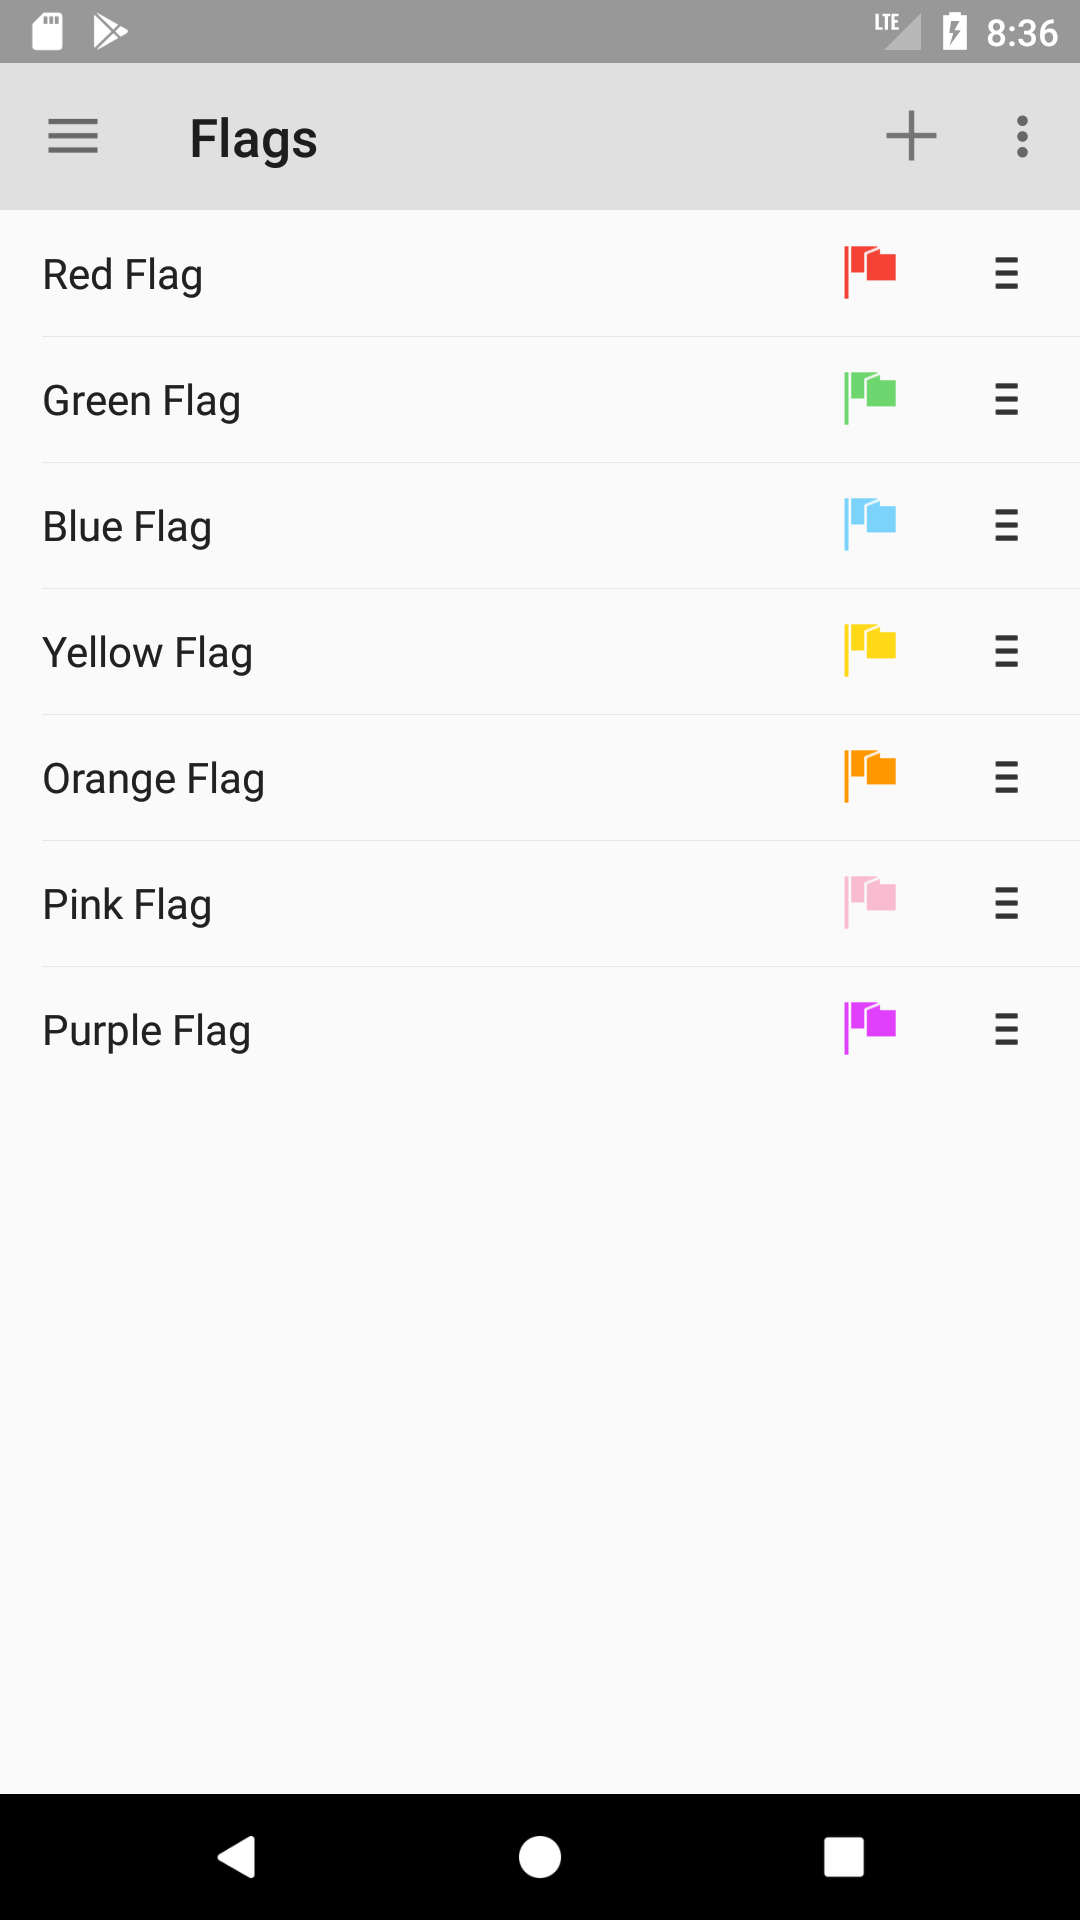 standard_flags.png